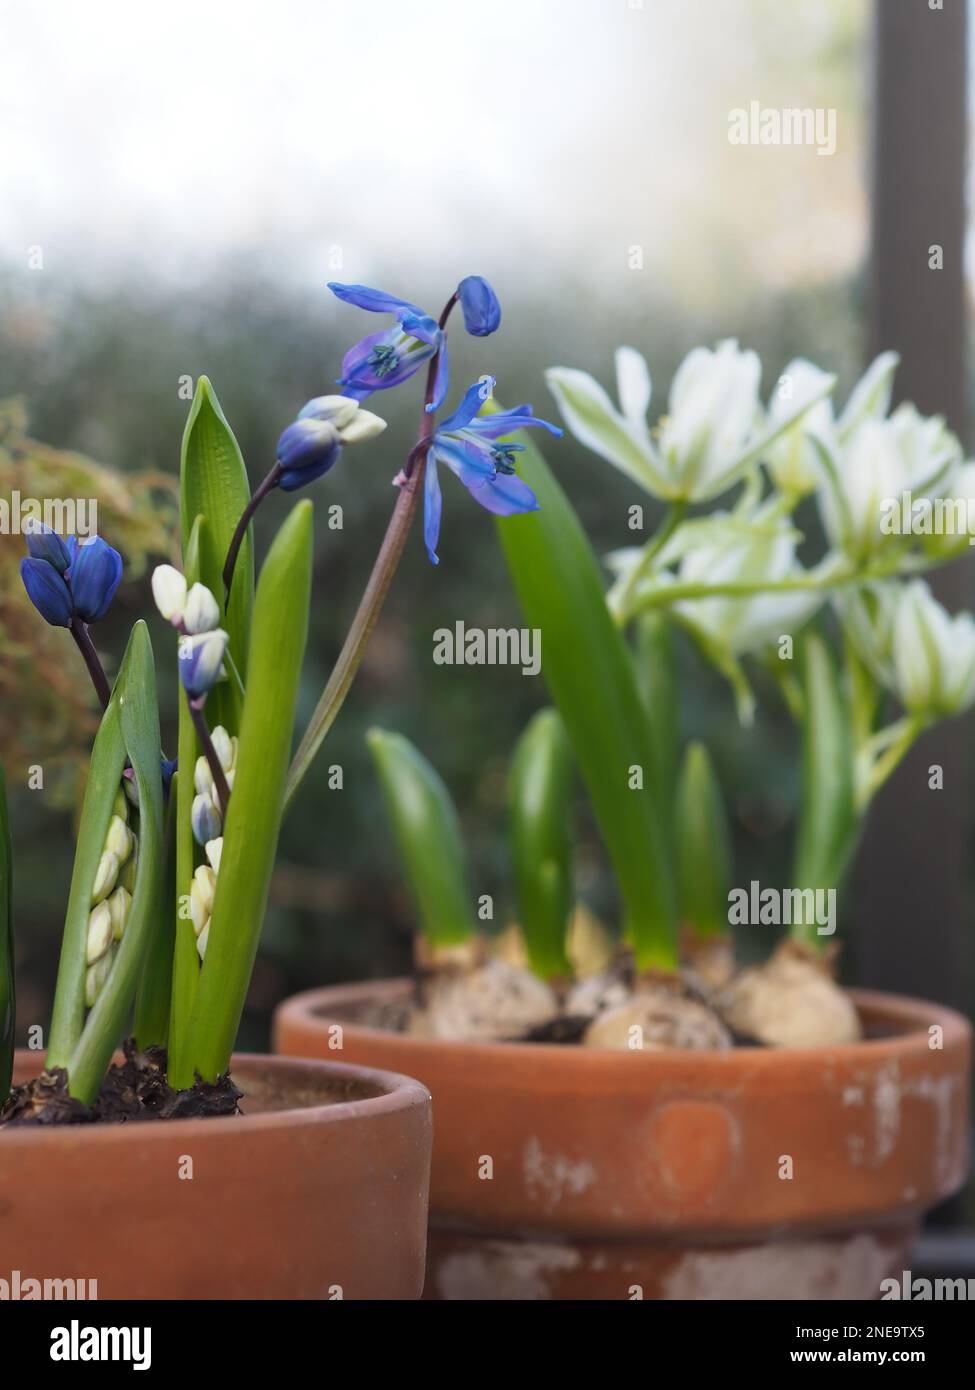 Close up of Scilla siberica (Siberian squill) and Ornithogalum balansae (Star of Bethlehem) spring bulbs in little terracotta pots taken in winter Stock Photo